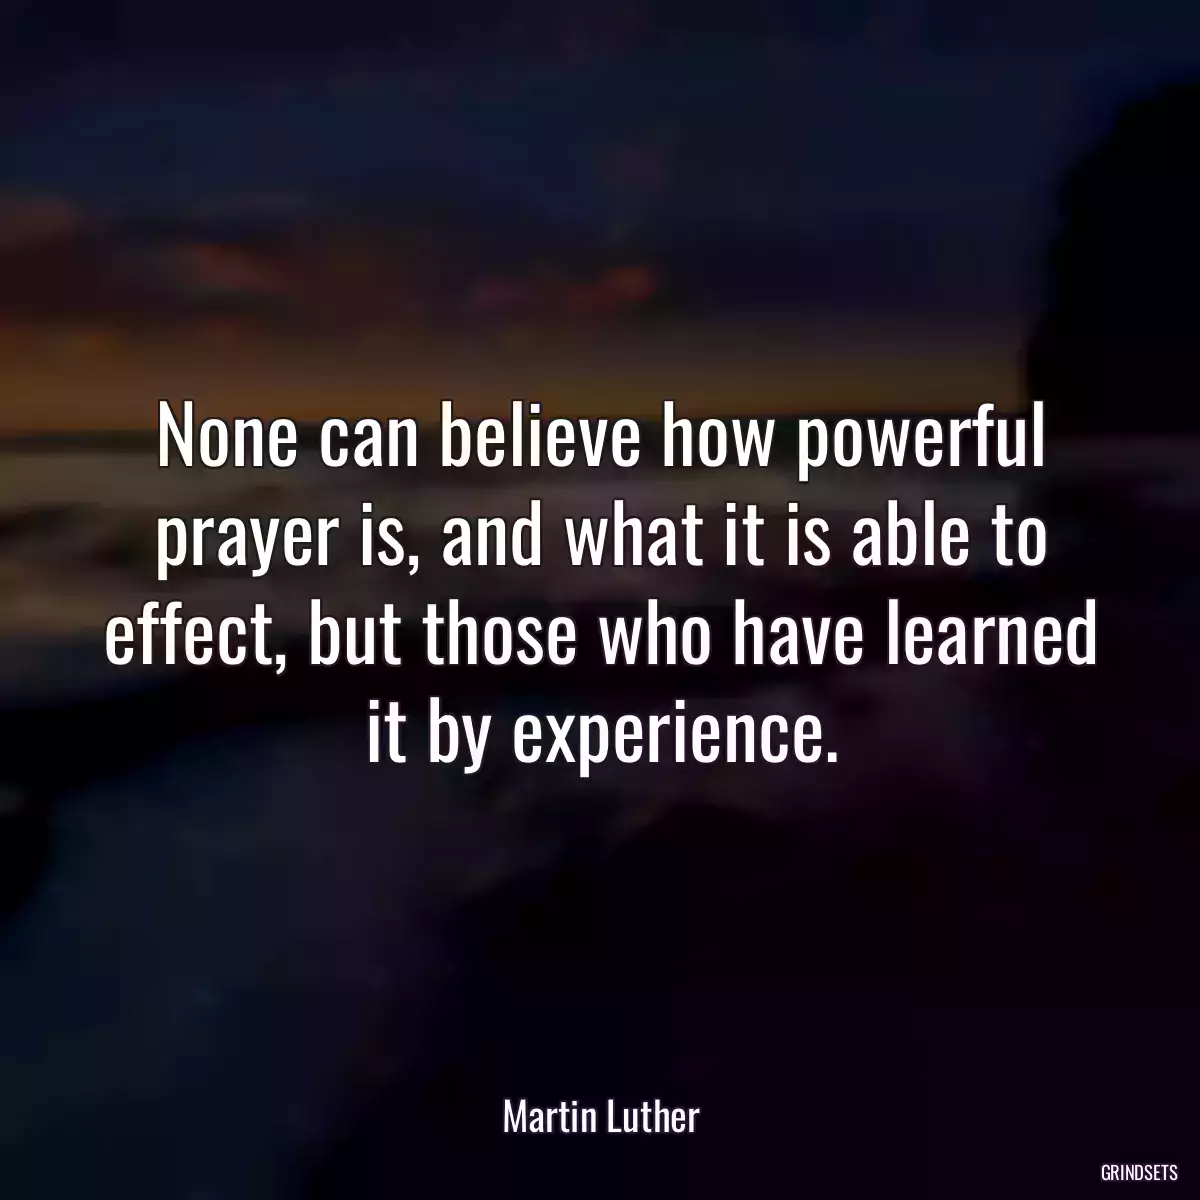 None can believe how powerful prayer is, and what it is able to effect, but those who have learned it by experience.